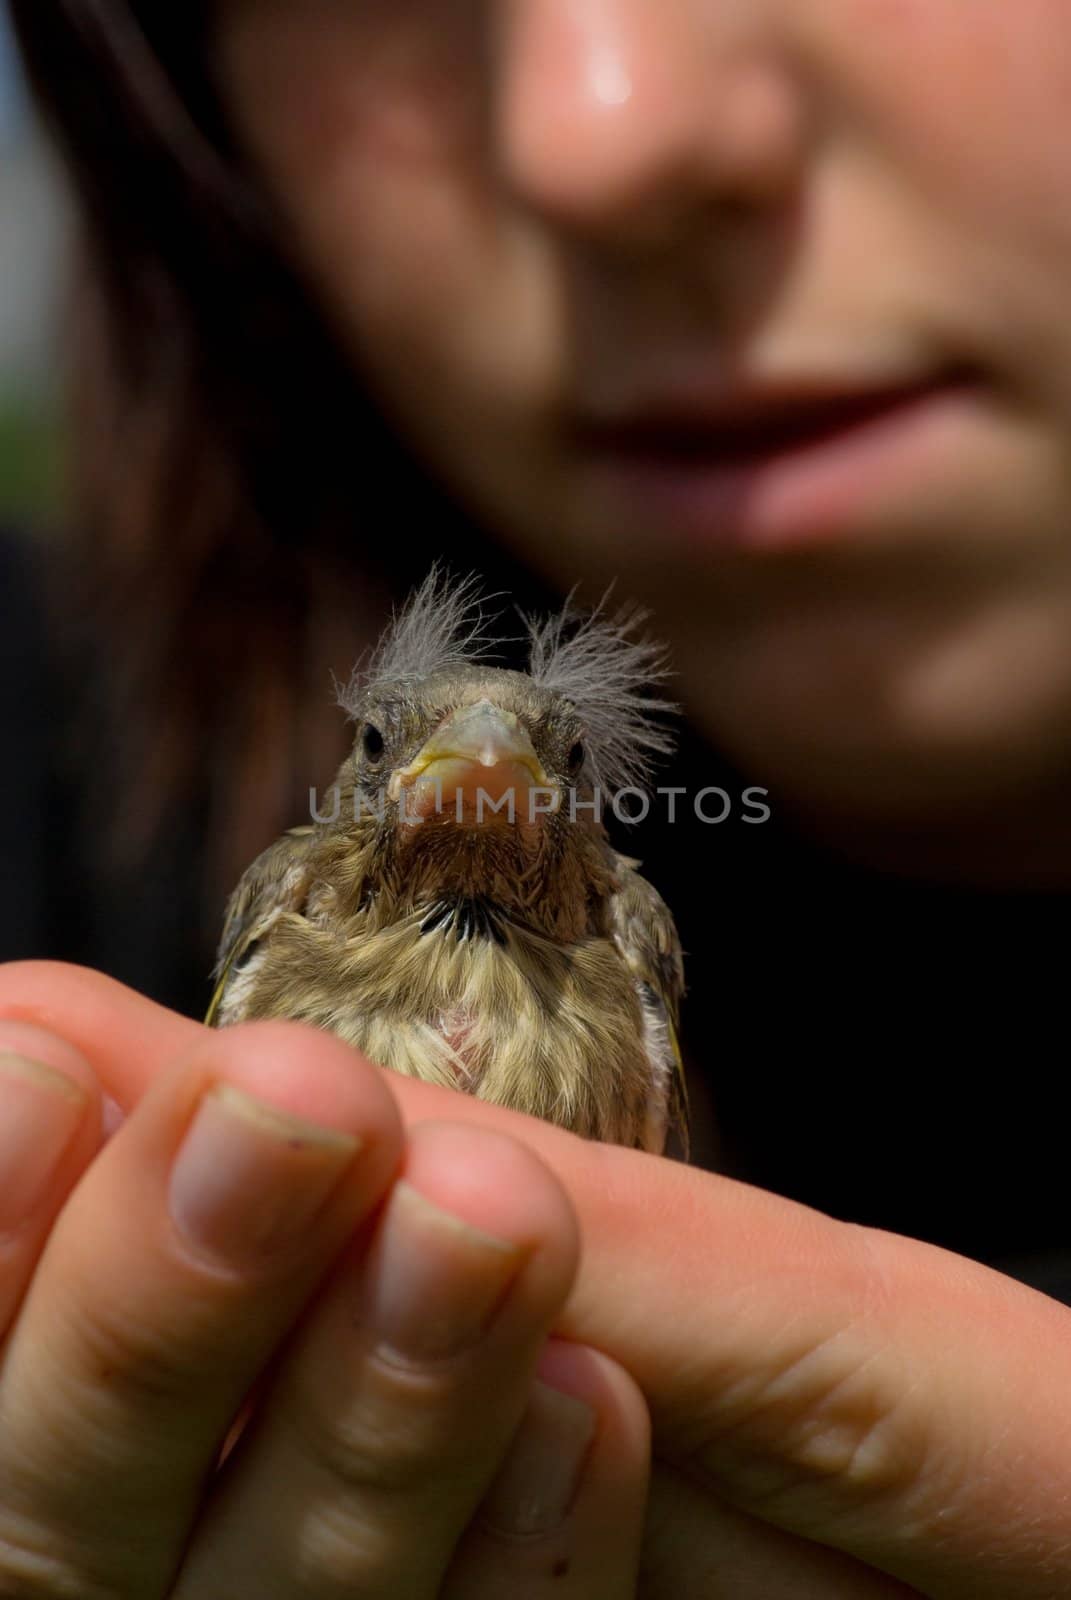 Girl hold chick sparrow in cupped hand.